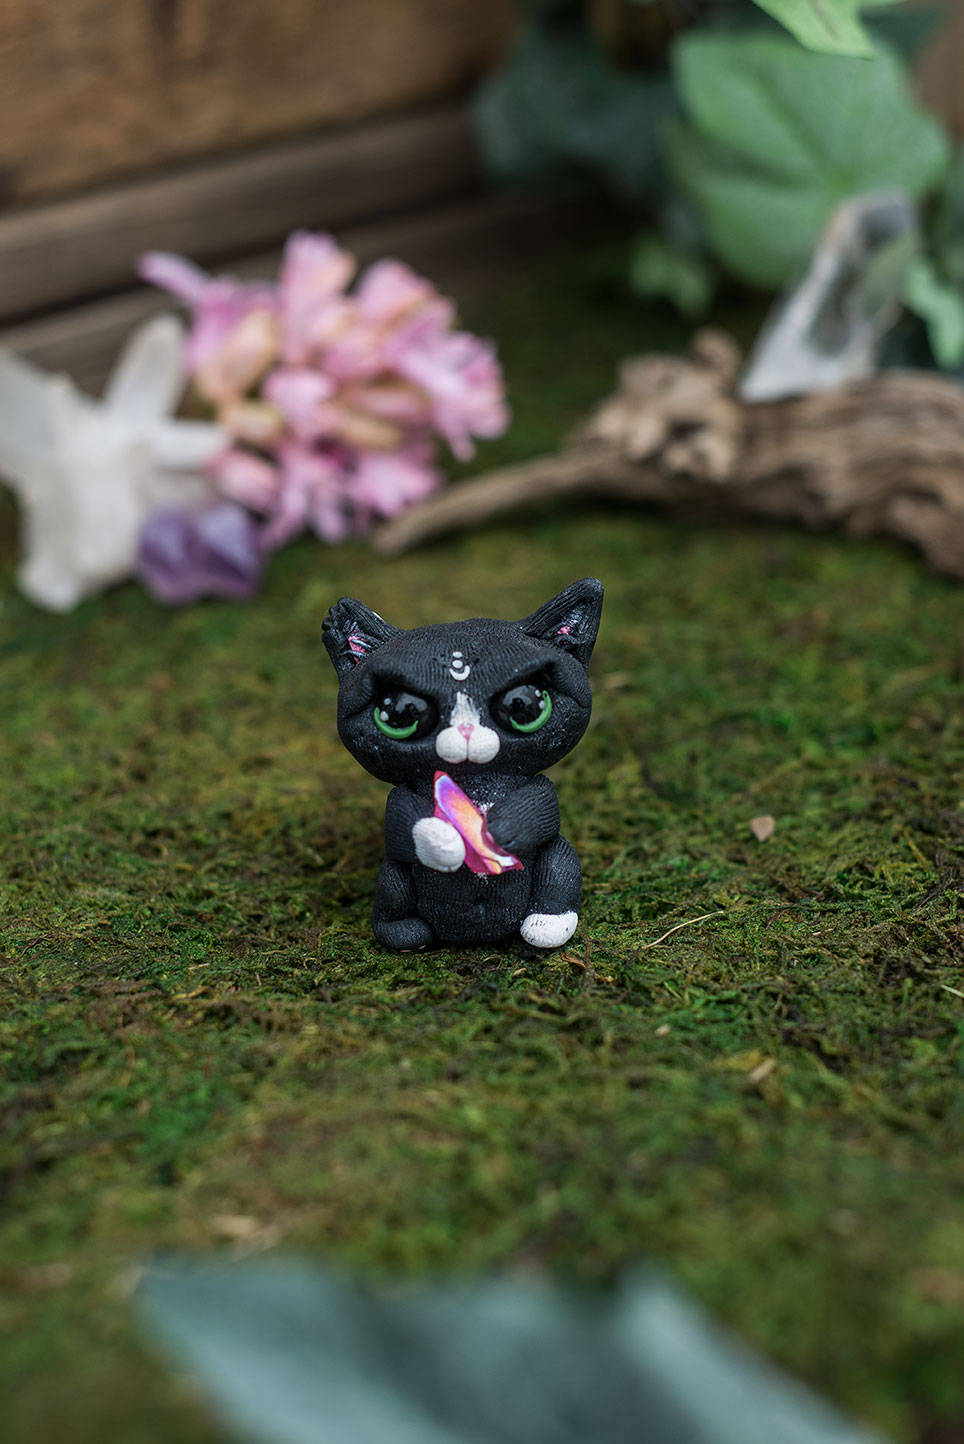 SALE!!! Black & White Angry Cat Mish - OOAK collectible handmade polymer clay art toy gift